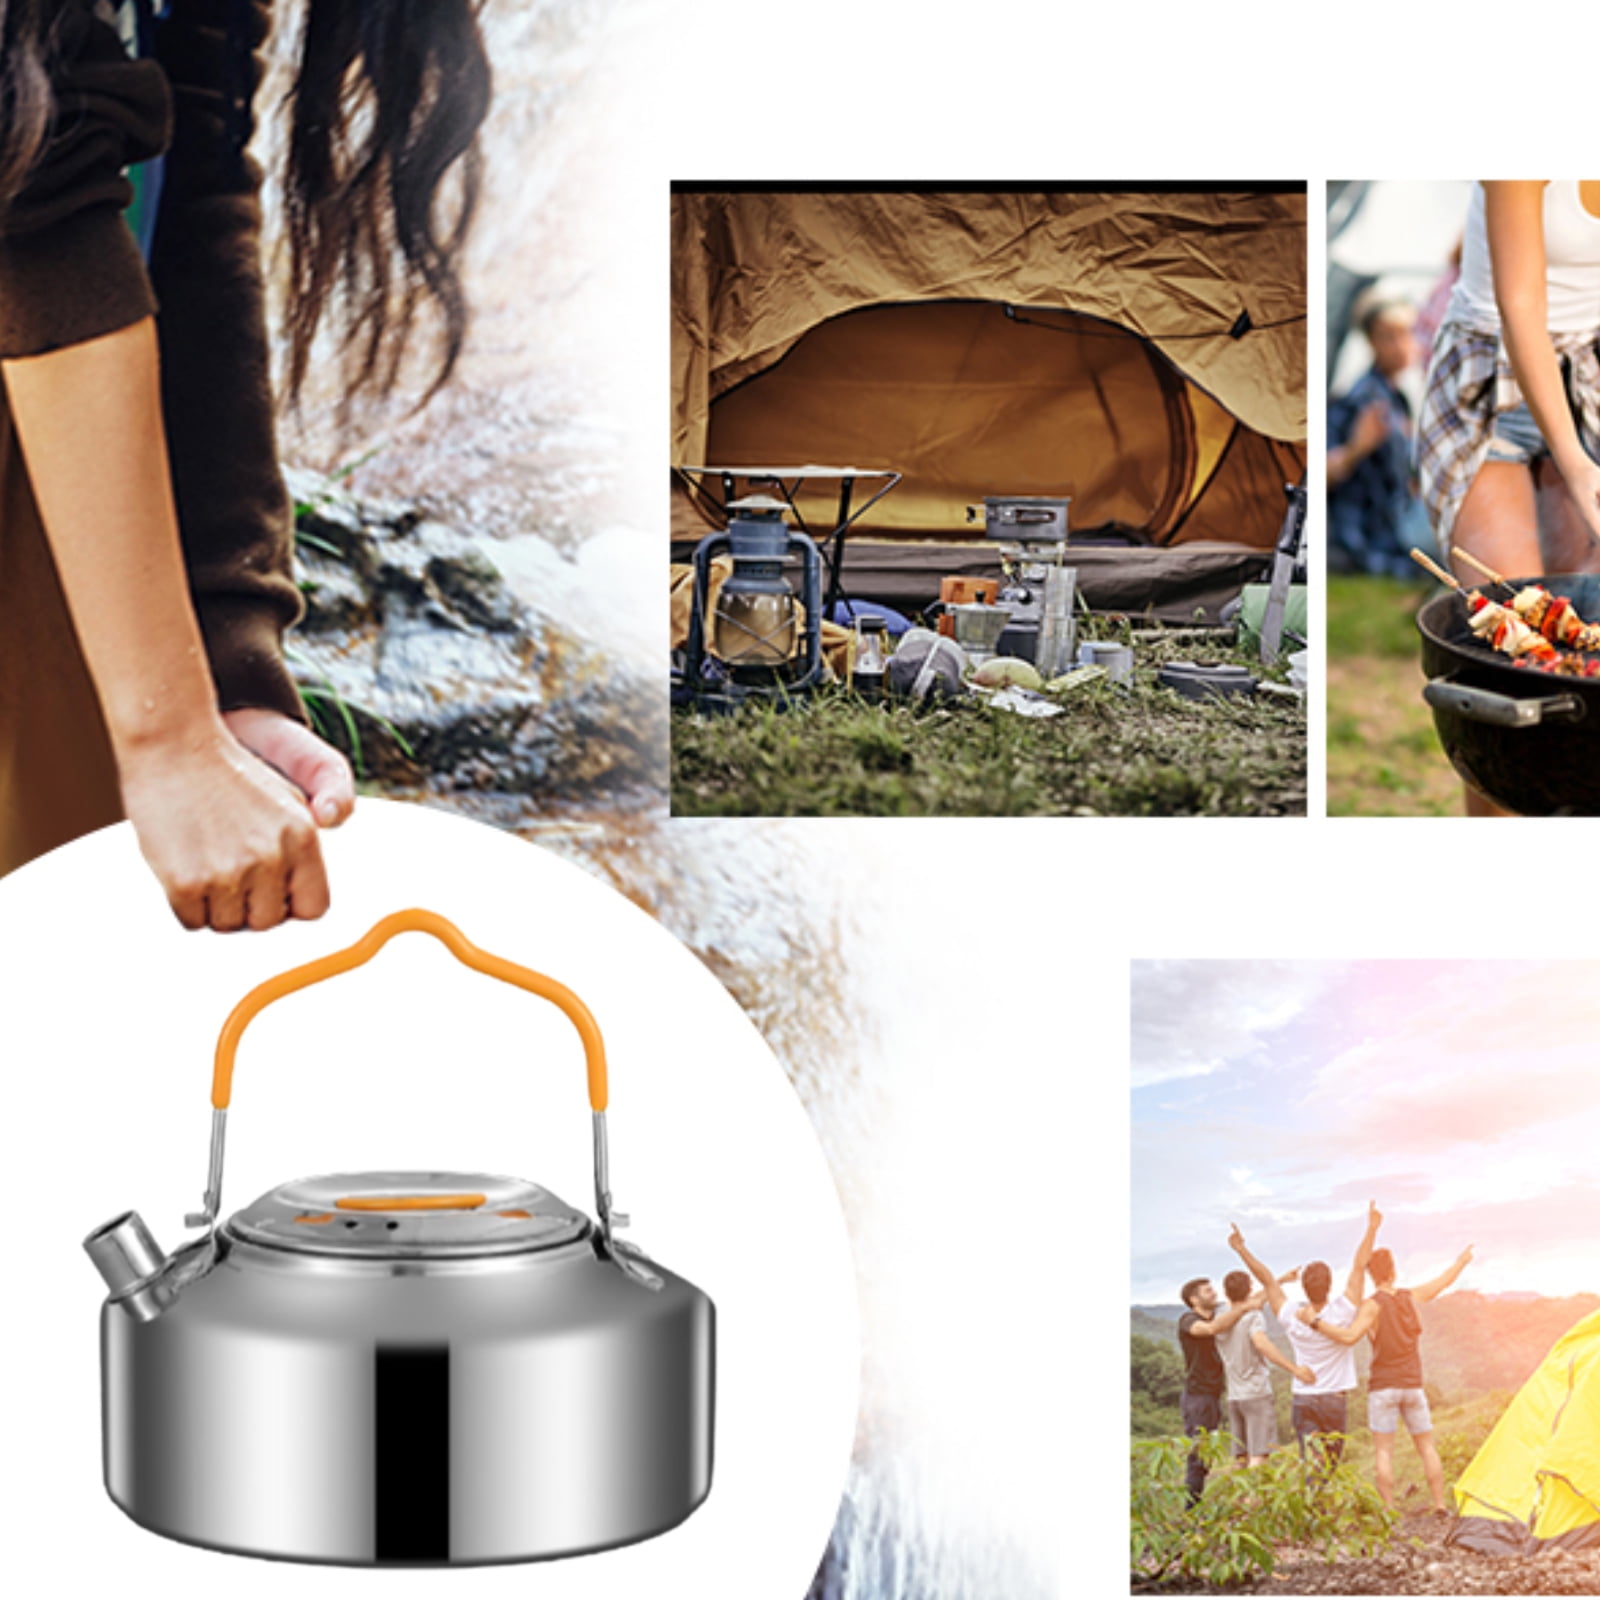 Water Boiler 1L Camping Water Kettle Teapot Coffee Pot Anti Scald Handle Teakettle Tea Pot Lightweight for Barbecue Mountaineering Campfire, Size